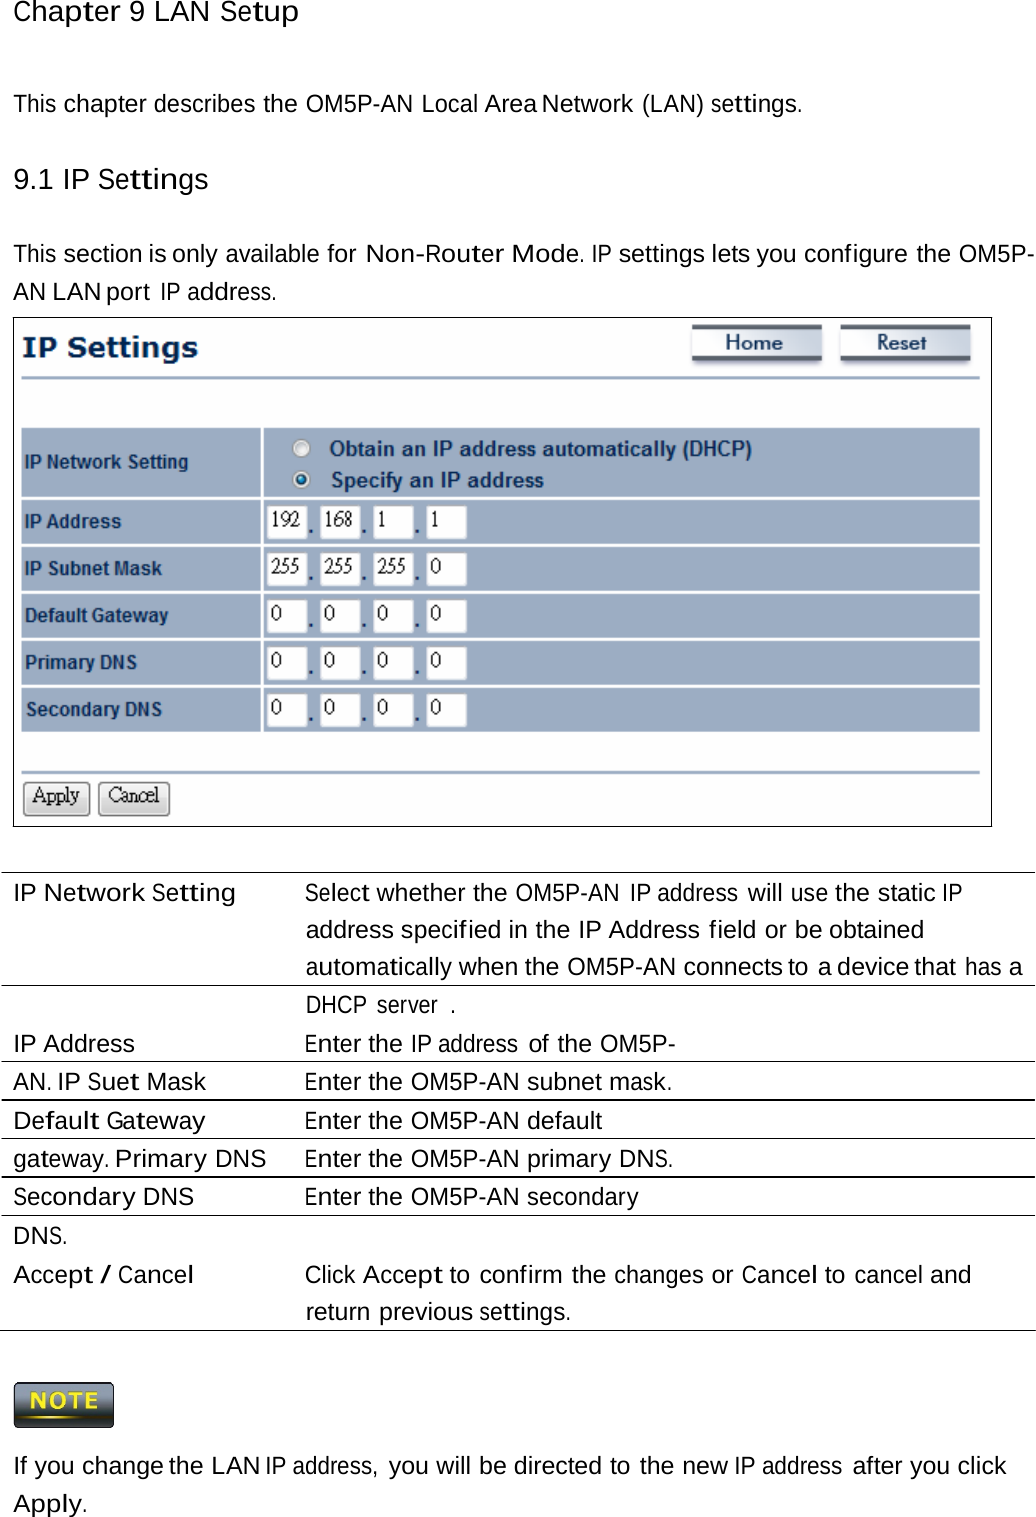 Chapter 9 LAN Setup This chapter describes the OM5P-AN Local Area Network (LAN) settings. 9.1 IP Settings This section is only available for Non-Router Mode. IP settings lets you configure the OM5P-AN LAN port IP address. IP Network Setting Select whether the OM5P-AN IP address will use the static IP address specif ied in the IP Address field or be obtained automatically when the OM5P-AN connects to  a device that has a DHCP server  . IP Address  Enter the IP address of the OM5P-AN. IP Suet Mask  Enter the OM5P-AN subnet mask. Default Gateway Enter the OM5P-AN default gateway. Primary DNS  Enter the OM5P-AN primary DNS. Secondary DNS  Enter the OM5P-AN secondary DNS. Accept / Cancel Click Accept to confirm the changes or Cancel to cancel and return previous settings.  If you change the LAN IP address, you will be directed to the new IP address after you click Apply. 